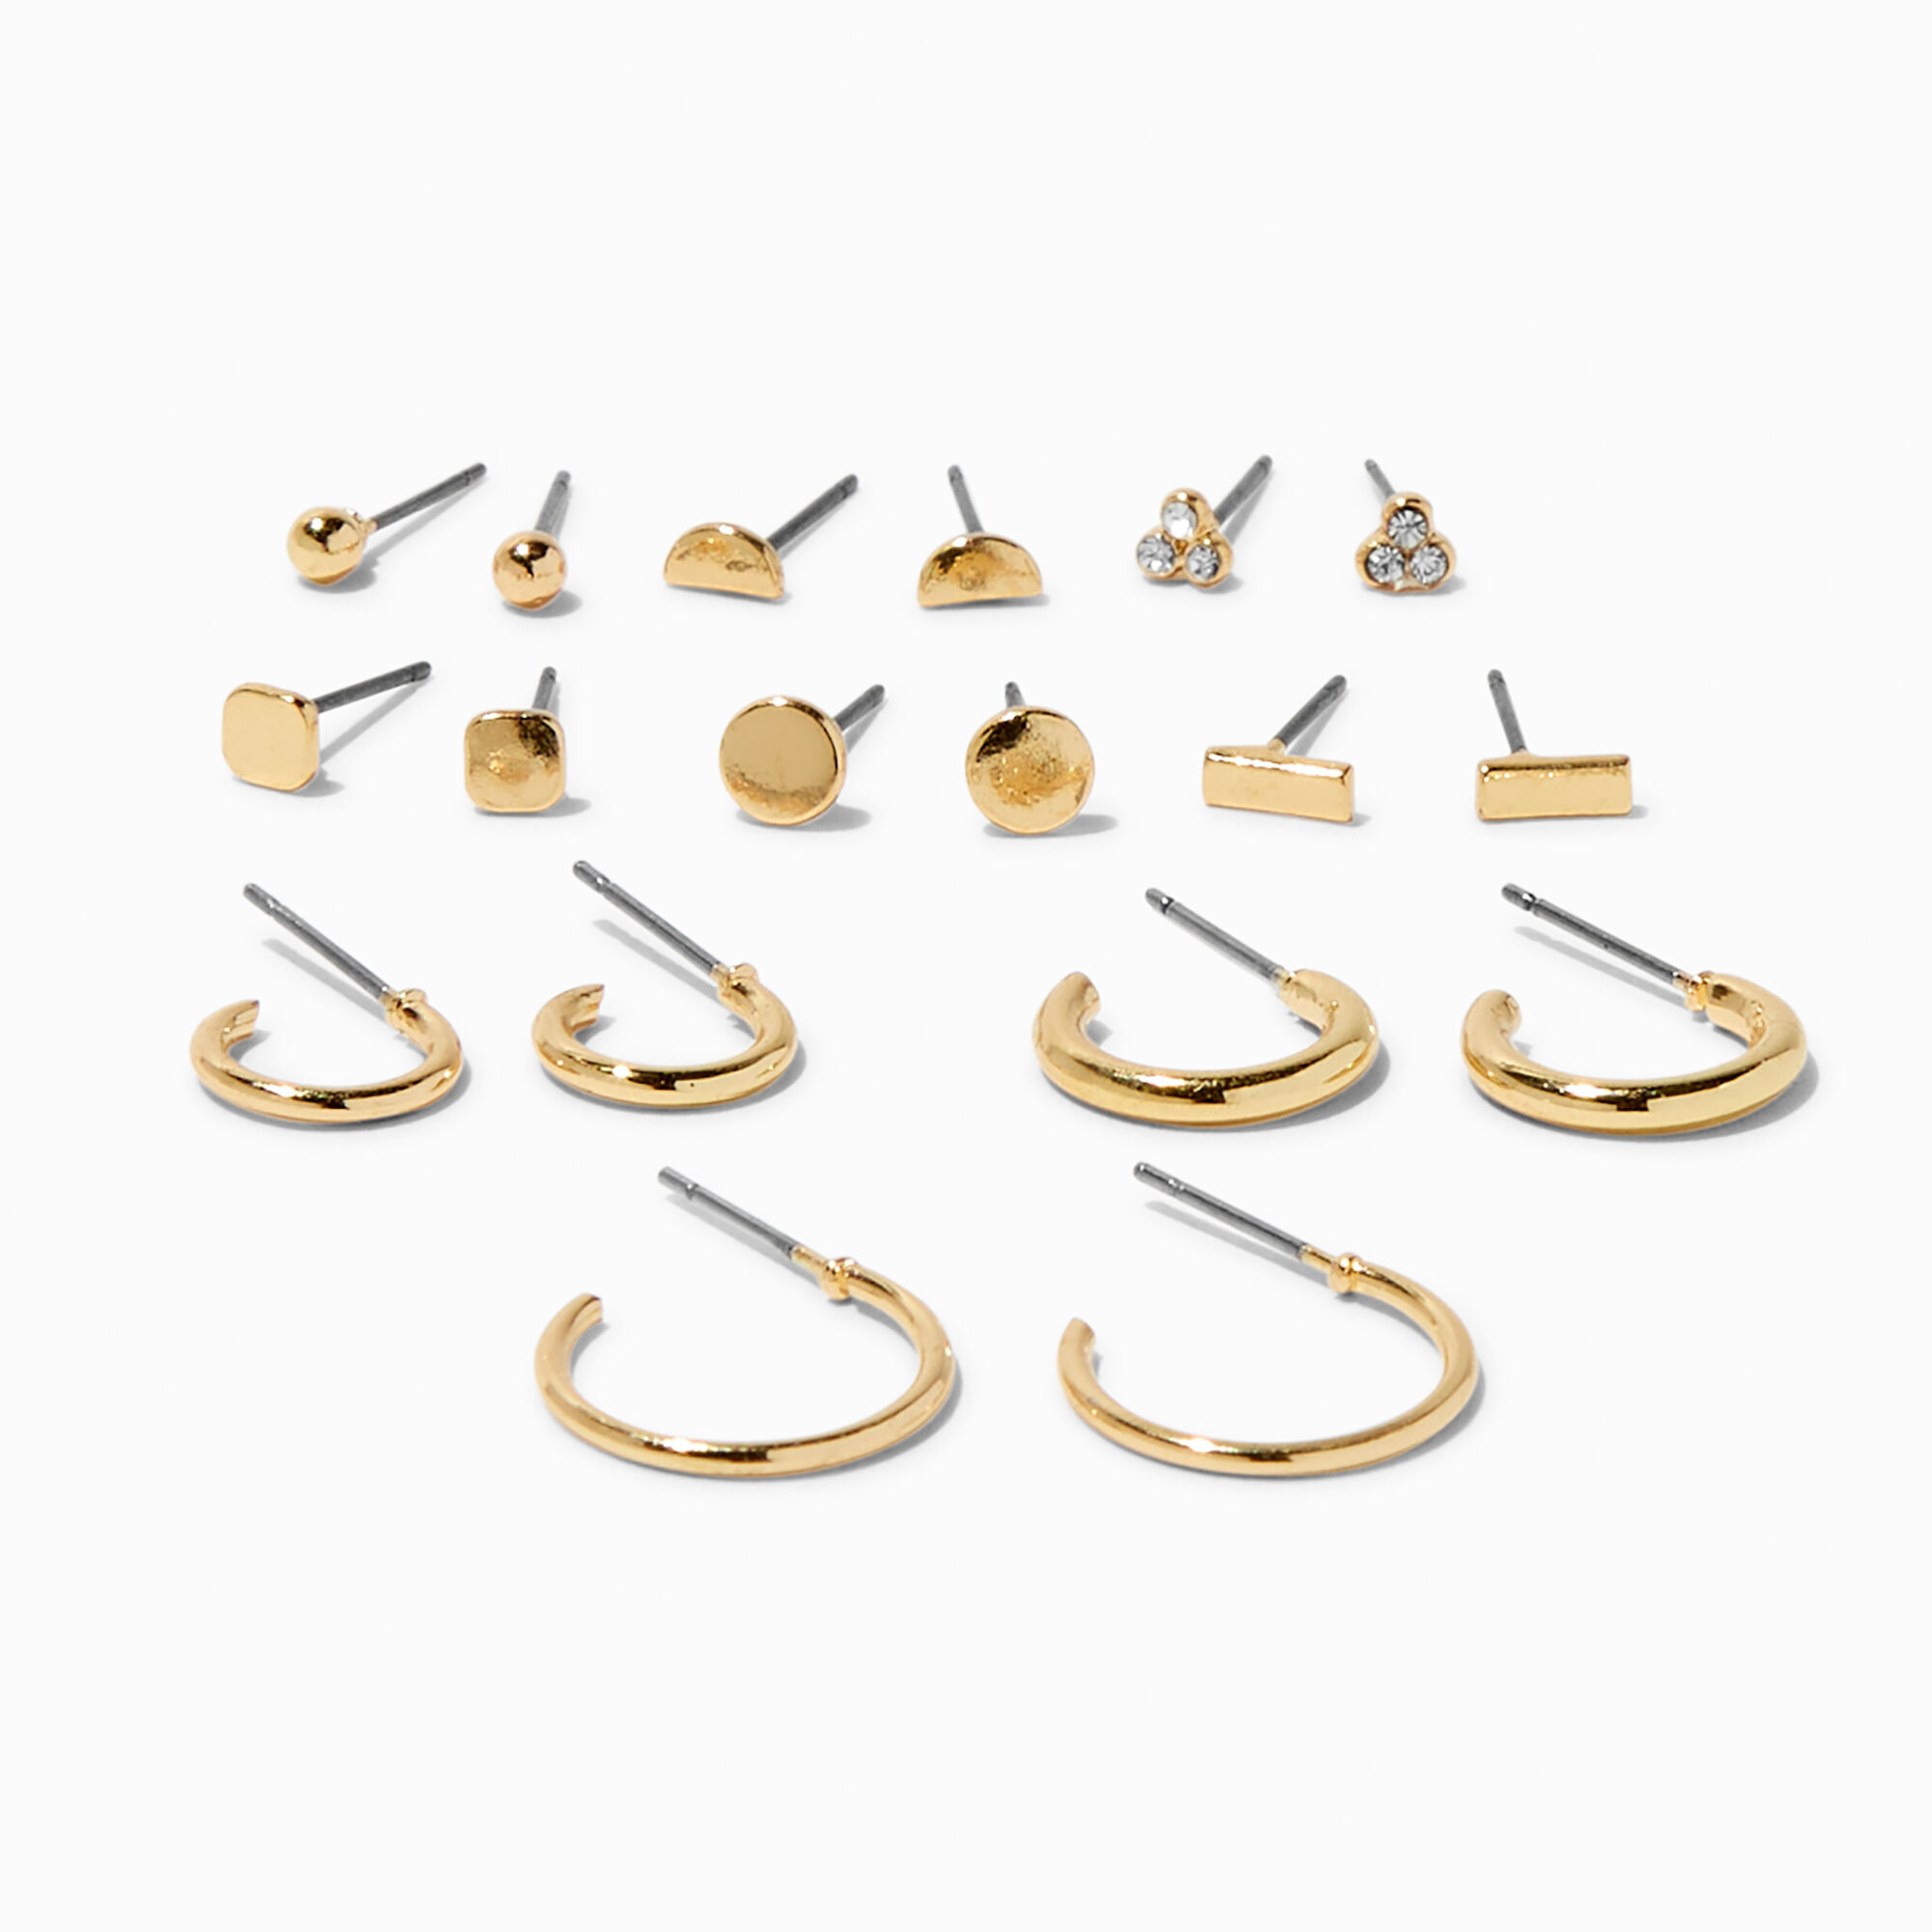 View Claires Tone Mini Geometric Earrings Set 9 Pack Gold information